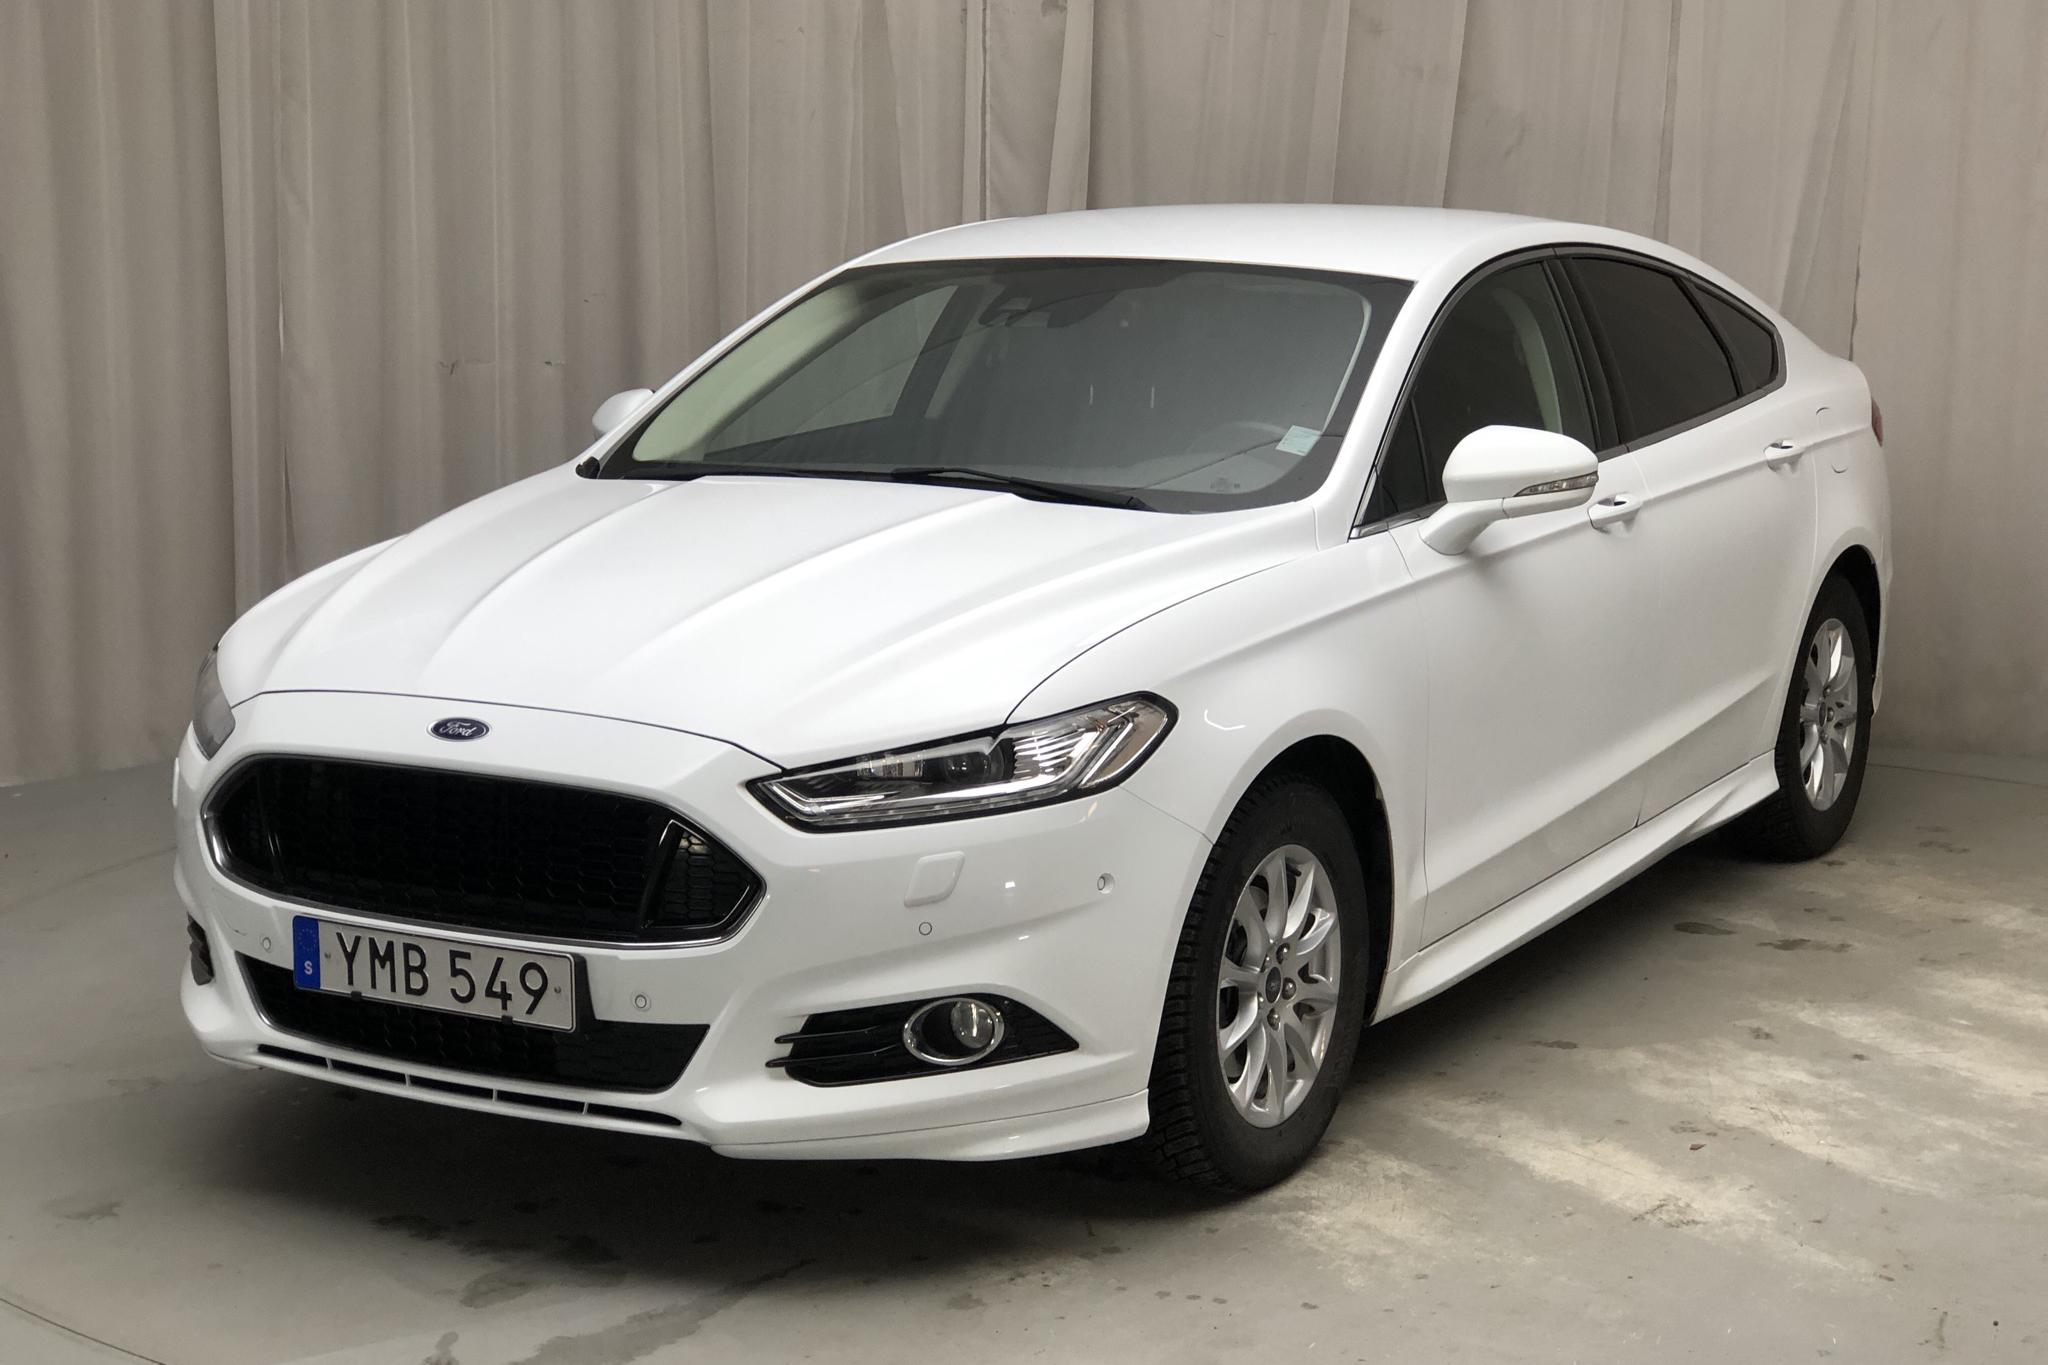 Ford Mondeo 2.0 TDCi 5dr (150hk) - 46 600 km - Automatic - white - 2017